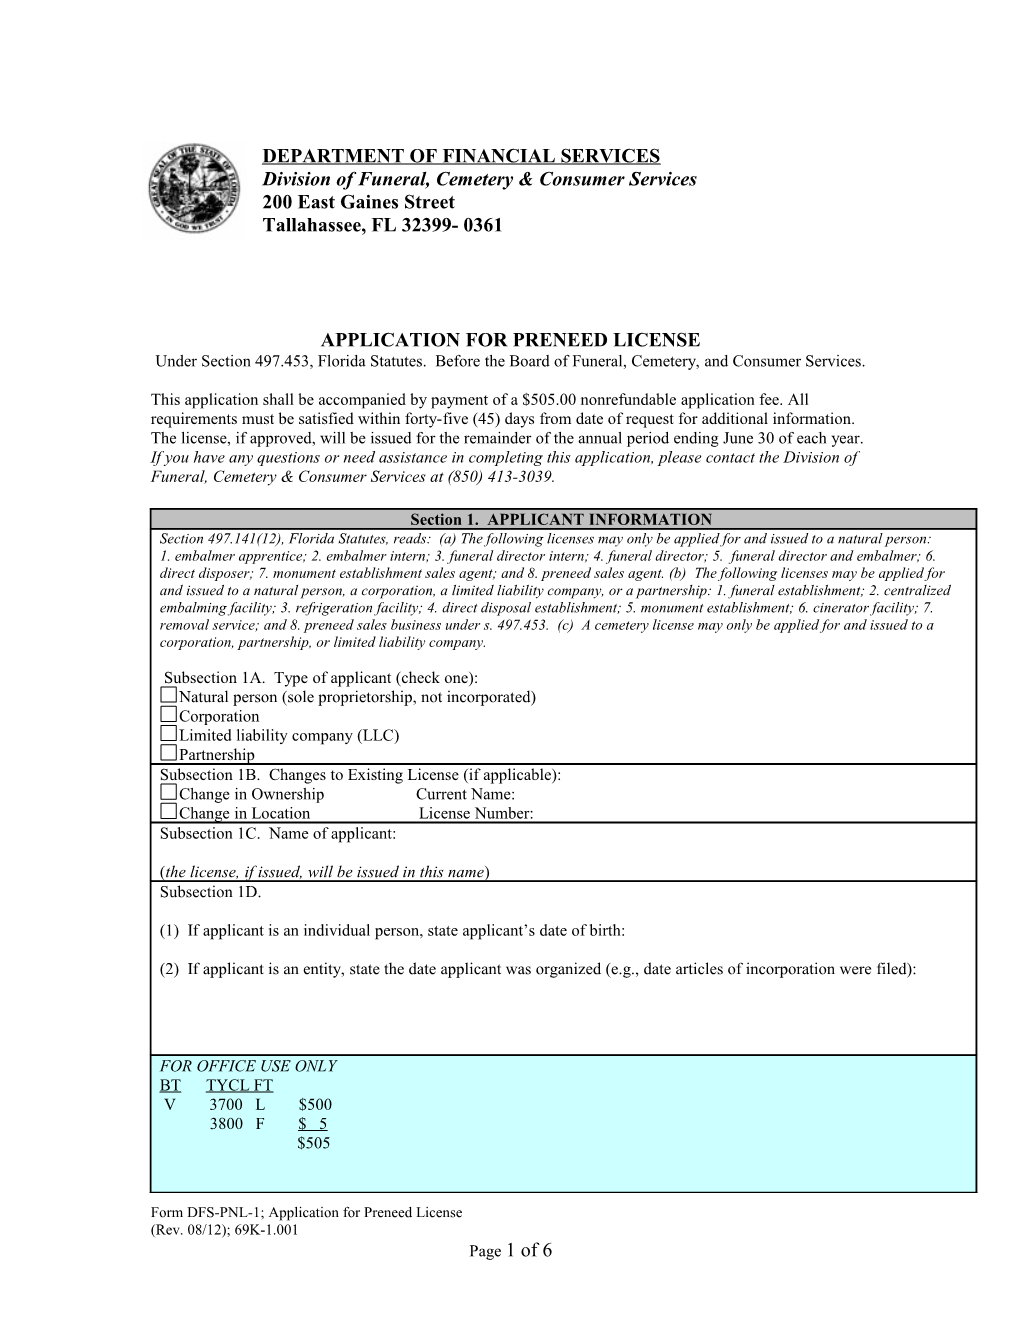 Application for Preneed License